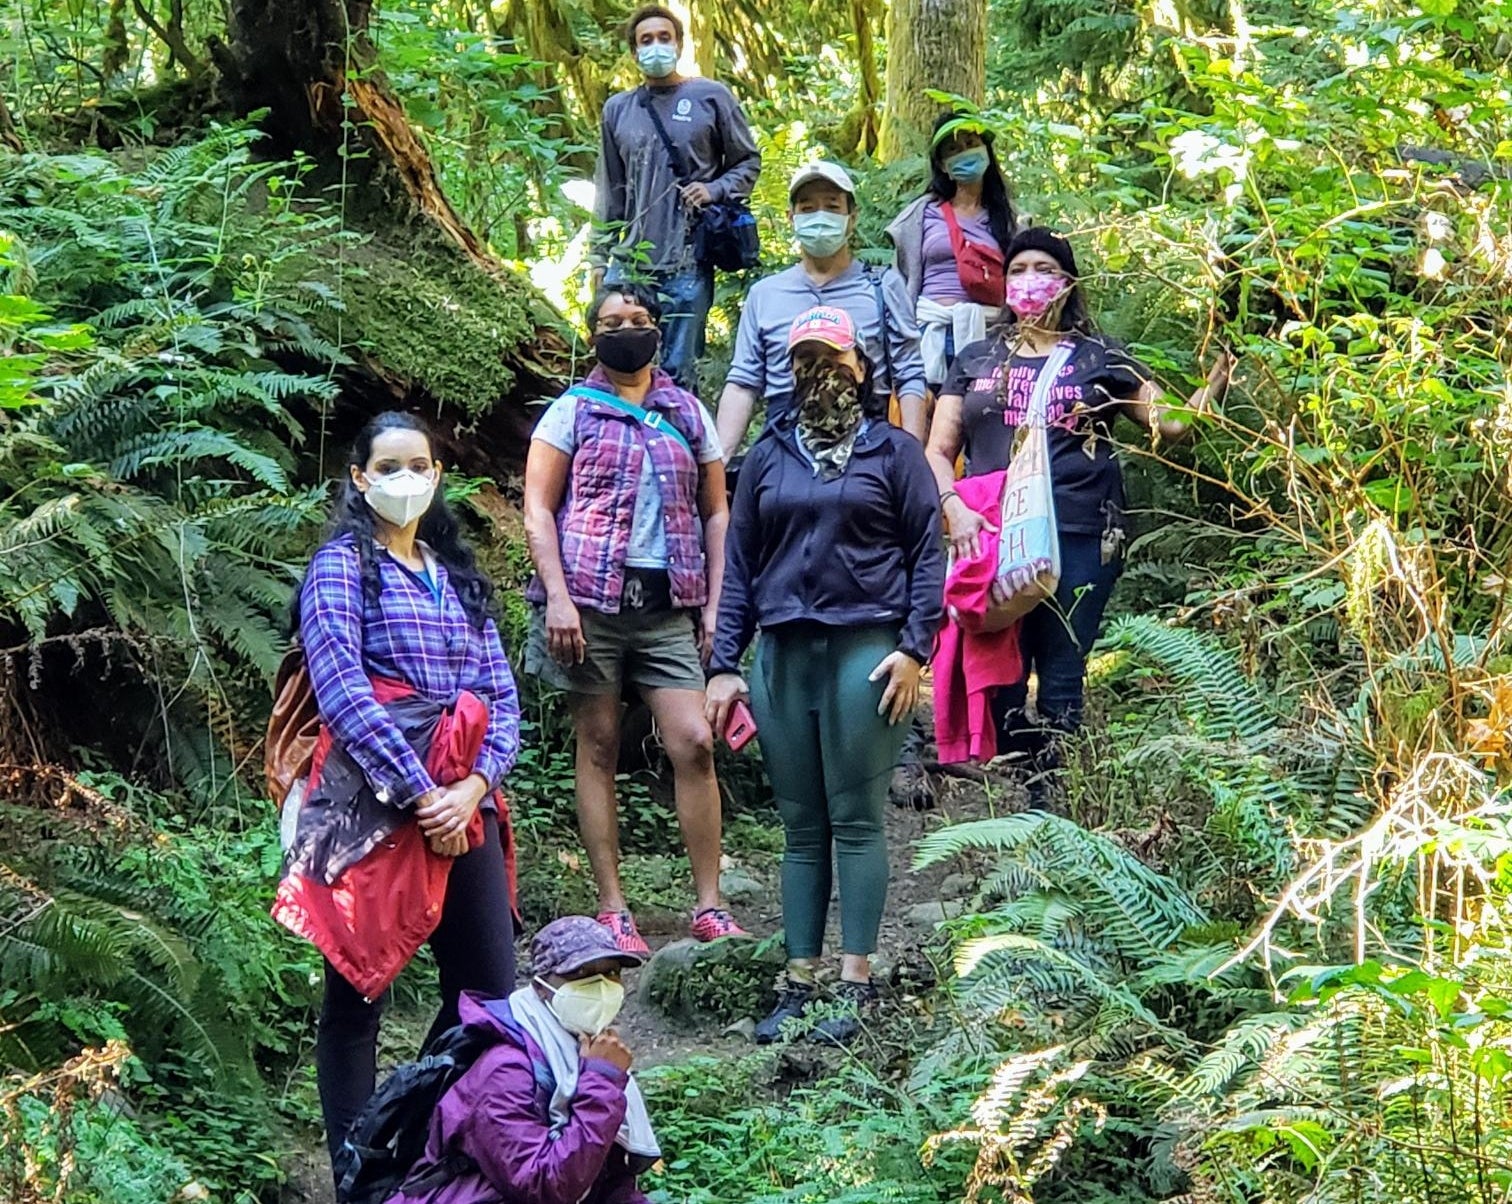 After Experiencing Racism On Portland's Trails, This Woman Started The City's BIPOC Hiking Group